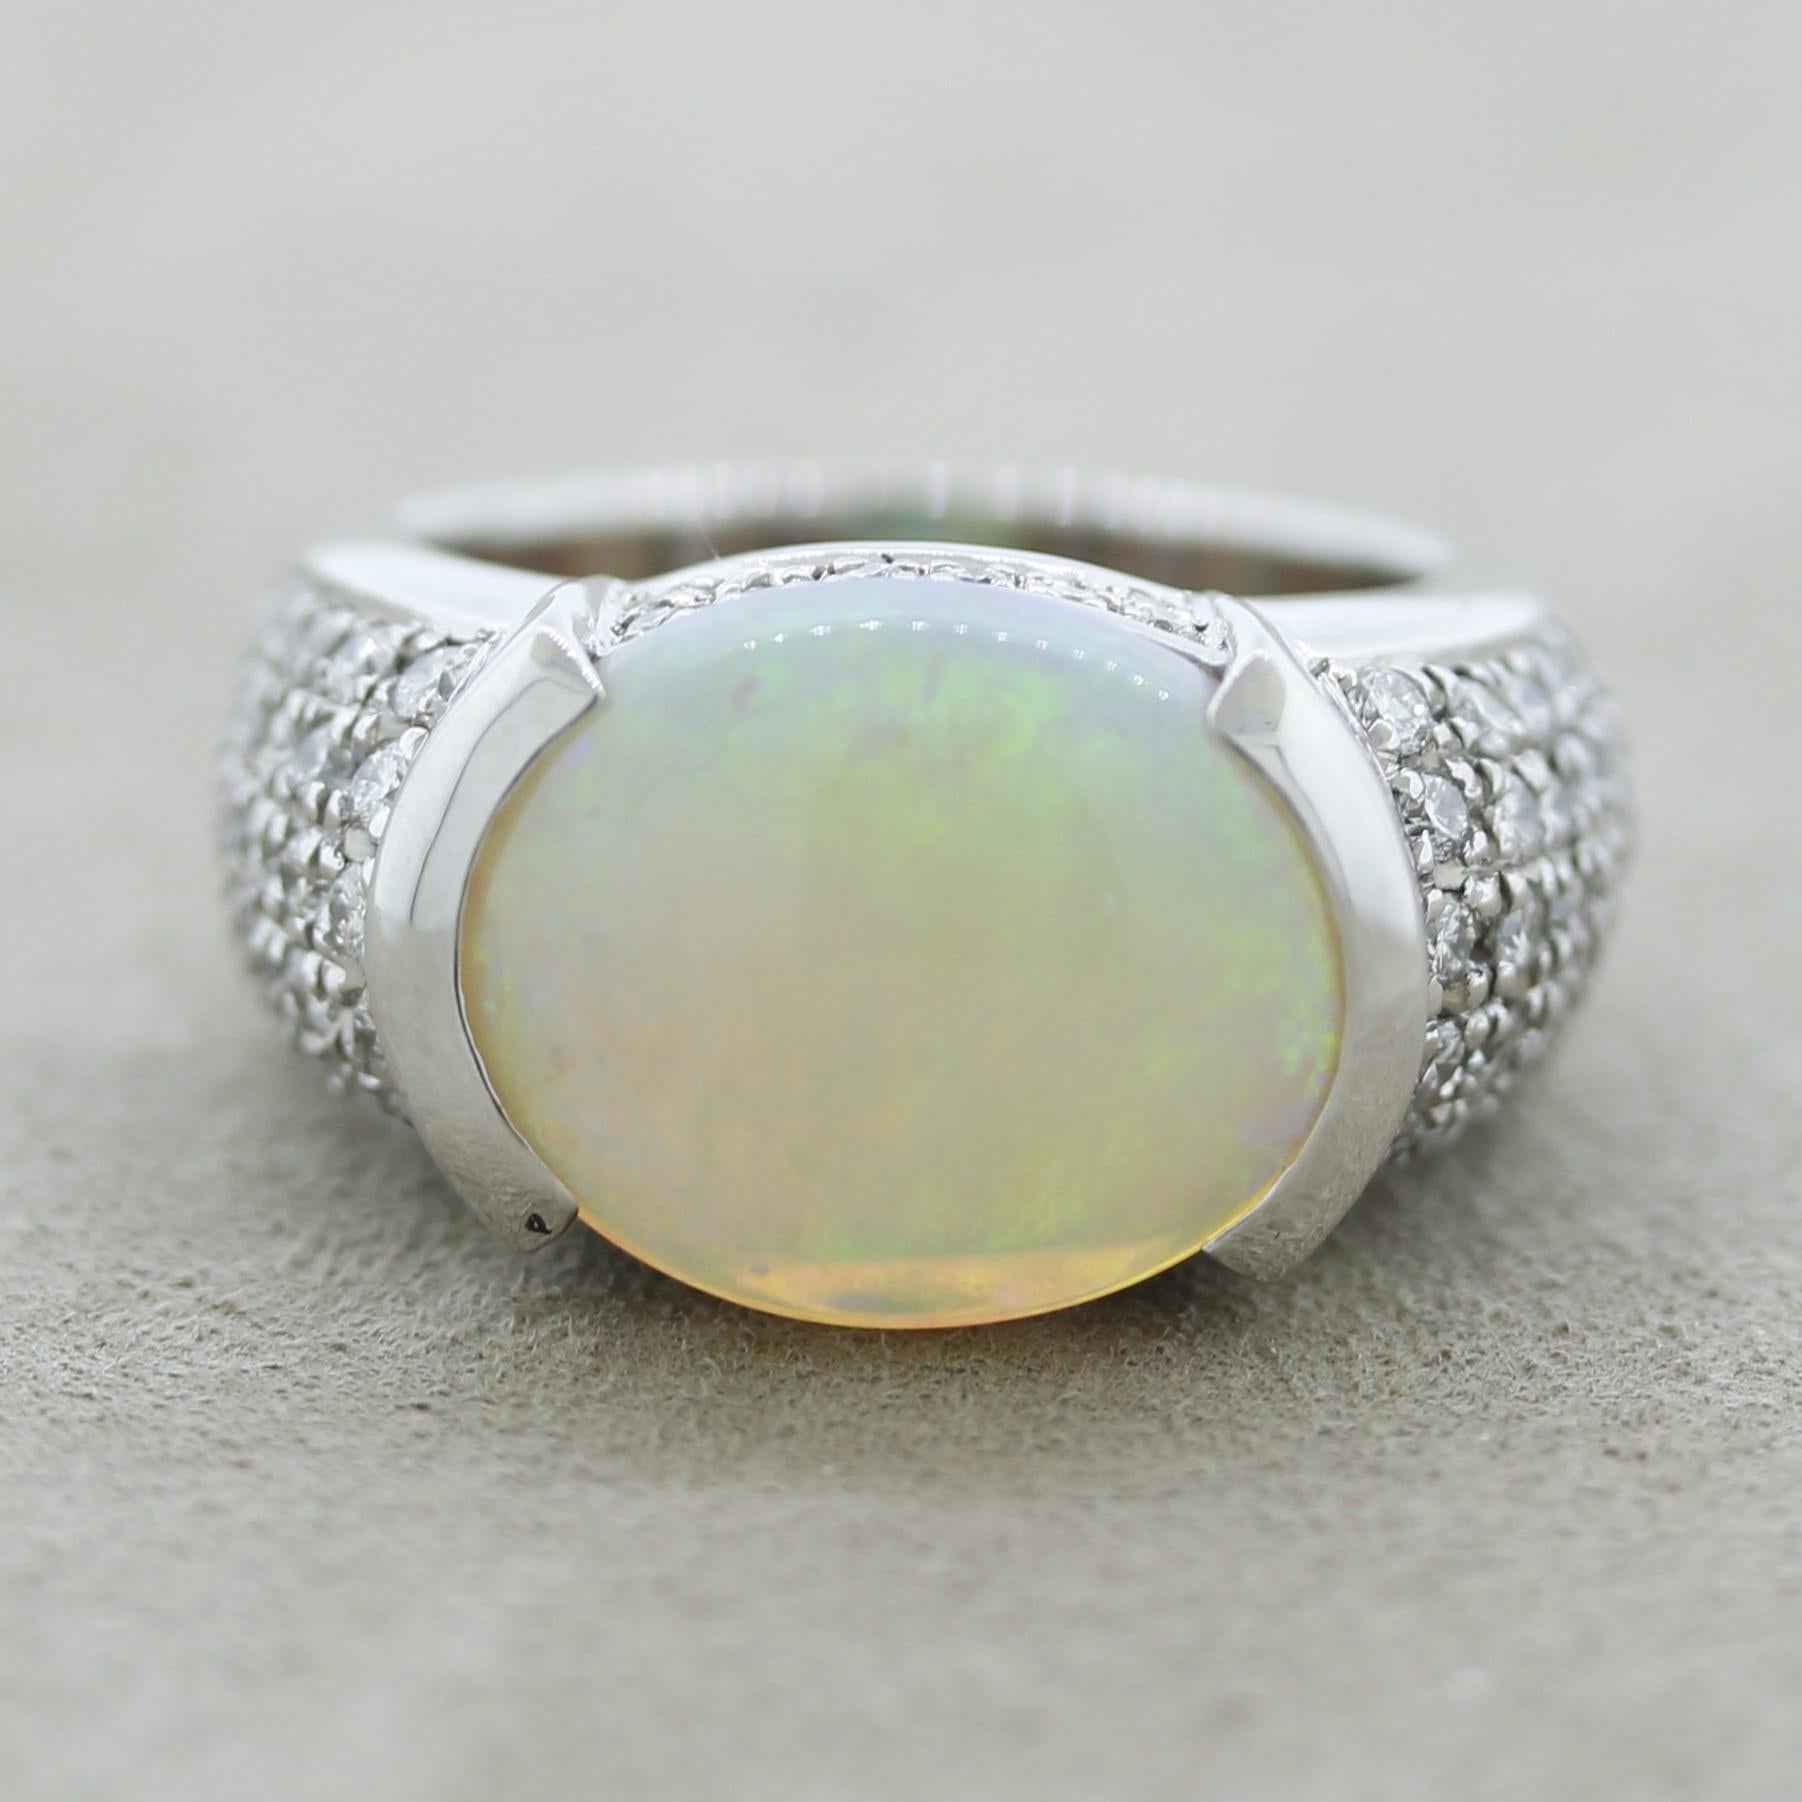 A lovely Australian opal which falls between a white and crystal opal, most likely from Lightning Ridge. It weighs 4.54 carats and has great play of color as the pattern rolls softly across the stone. It is accented by 0.91 carats of round